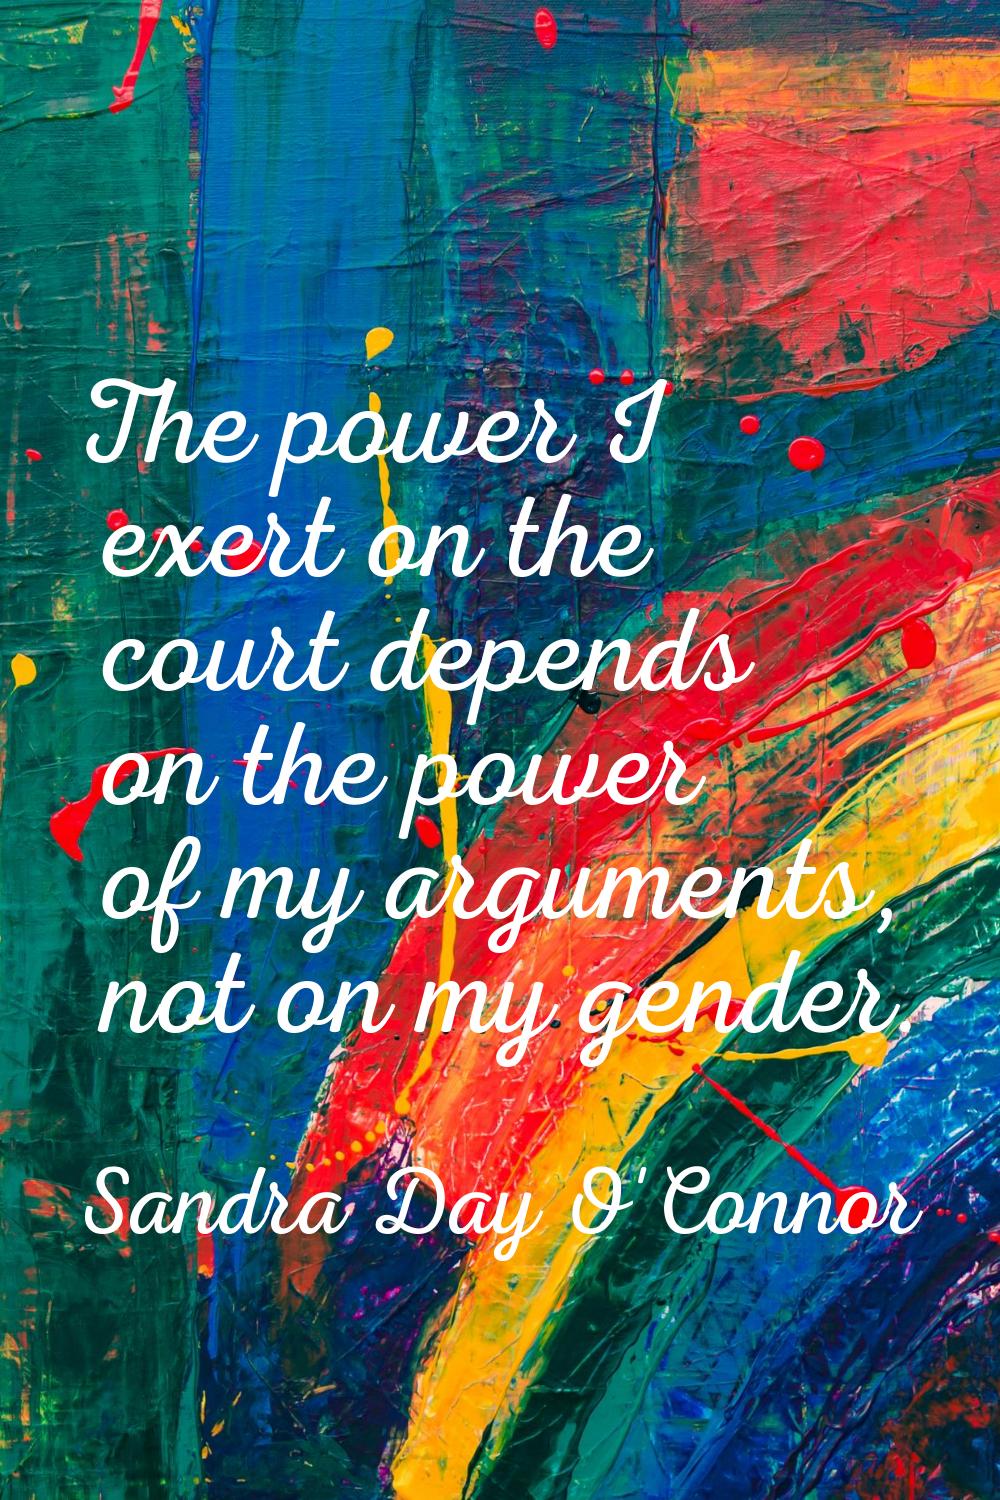 The power I exert on the court depends on the power of my arguments, not on my gender.